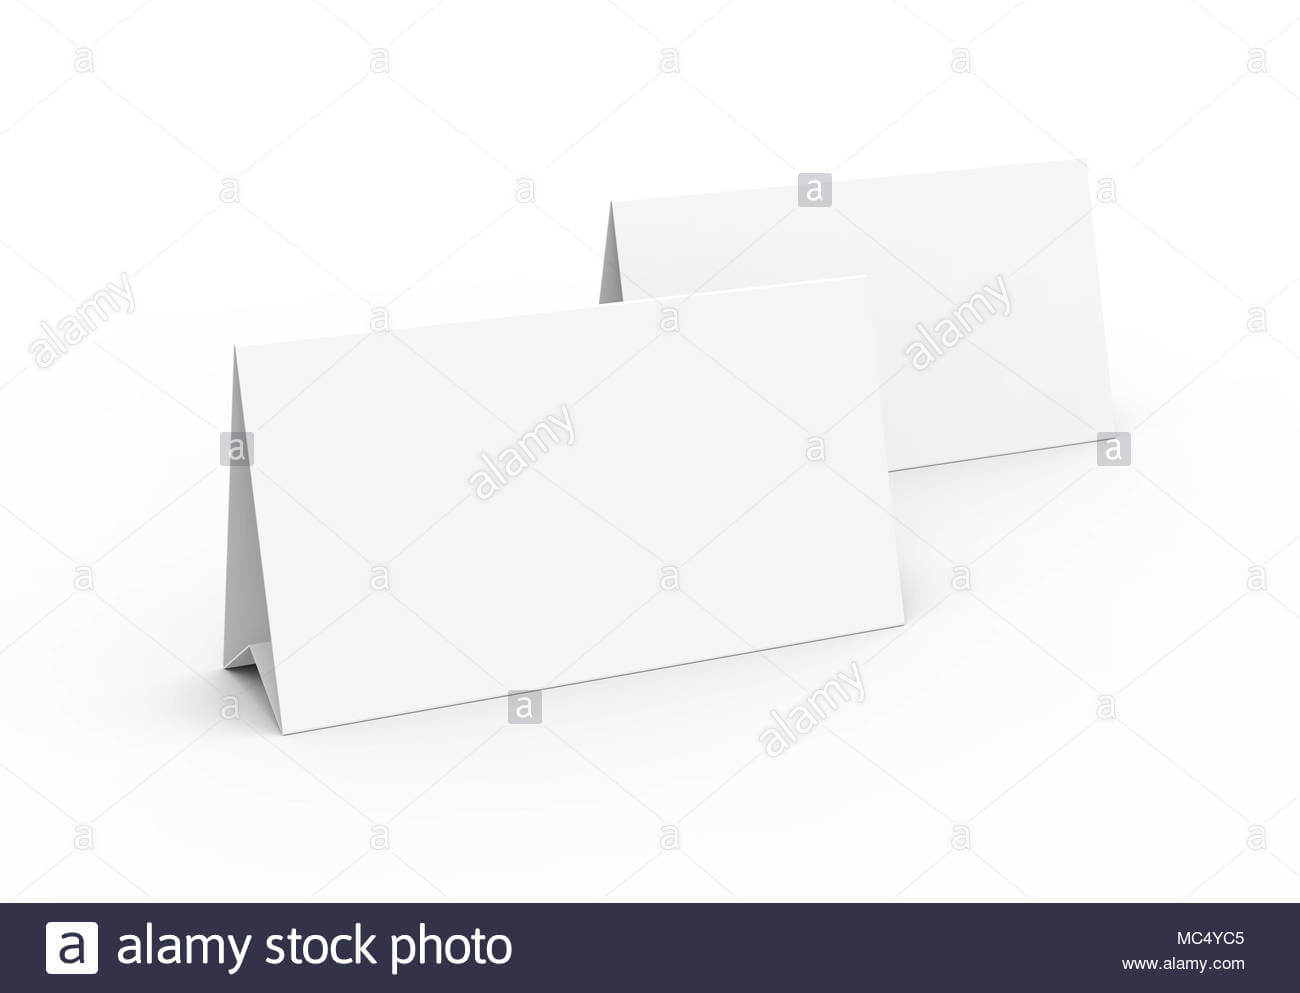 Blank Paper Tent Template, White Tent Cards Set With Empty Regarding Blank Tent Card Template